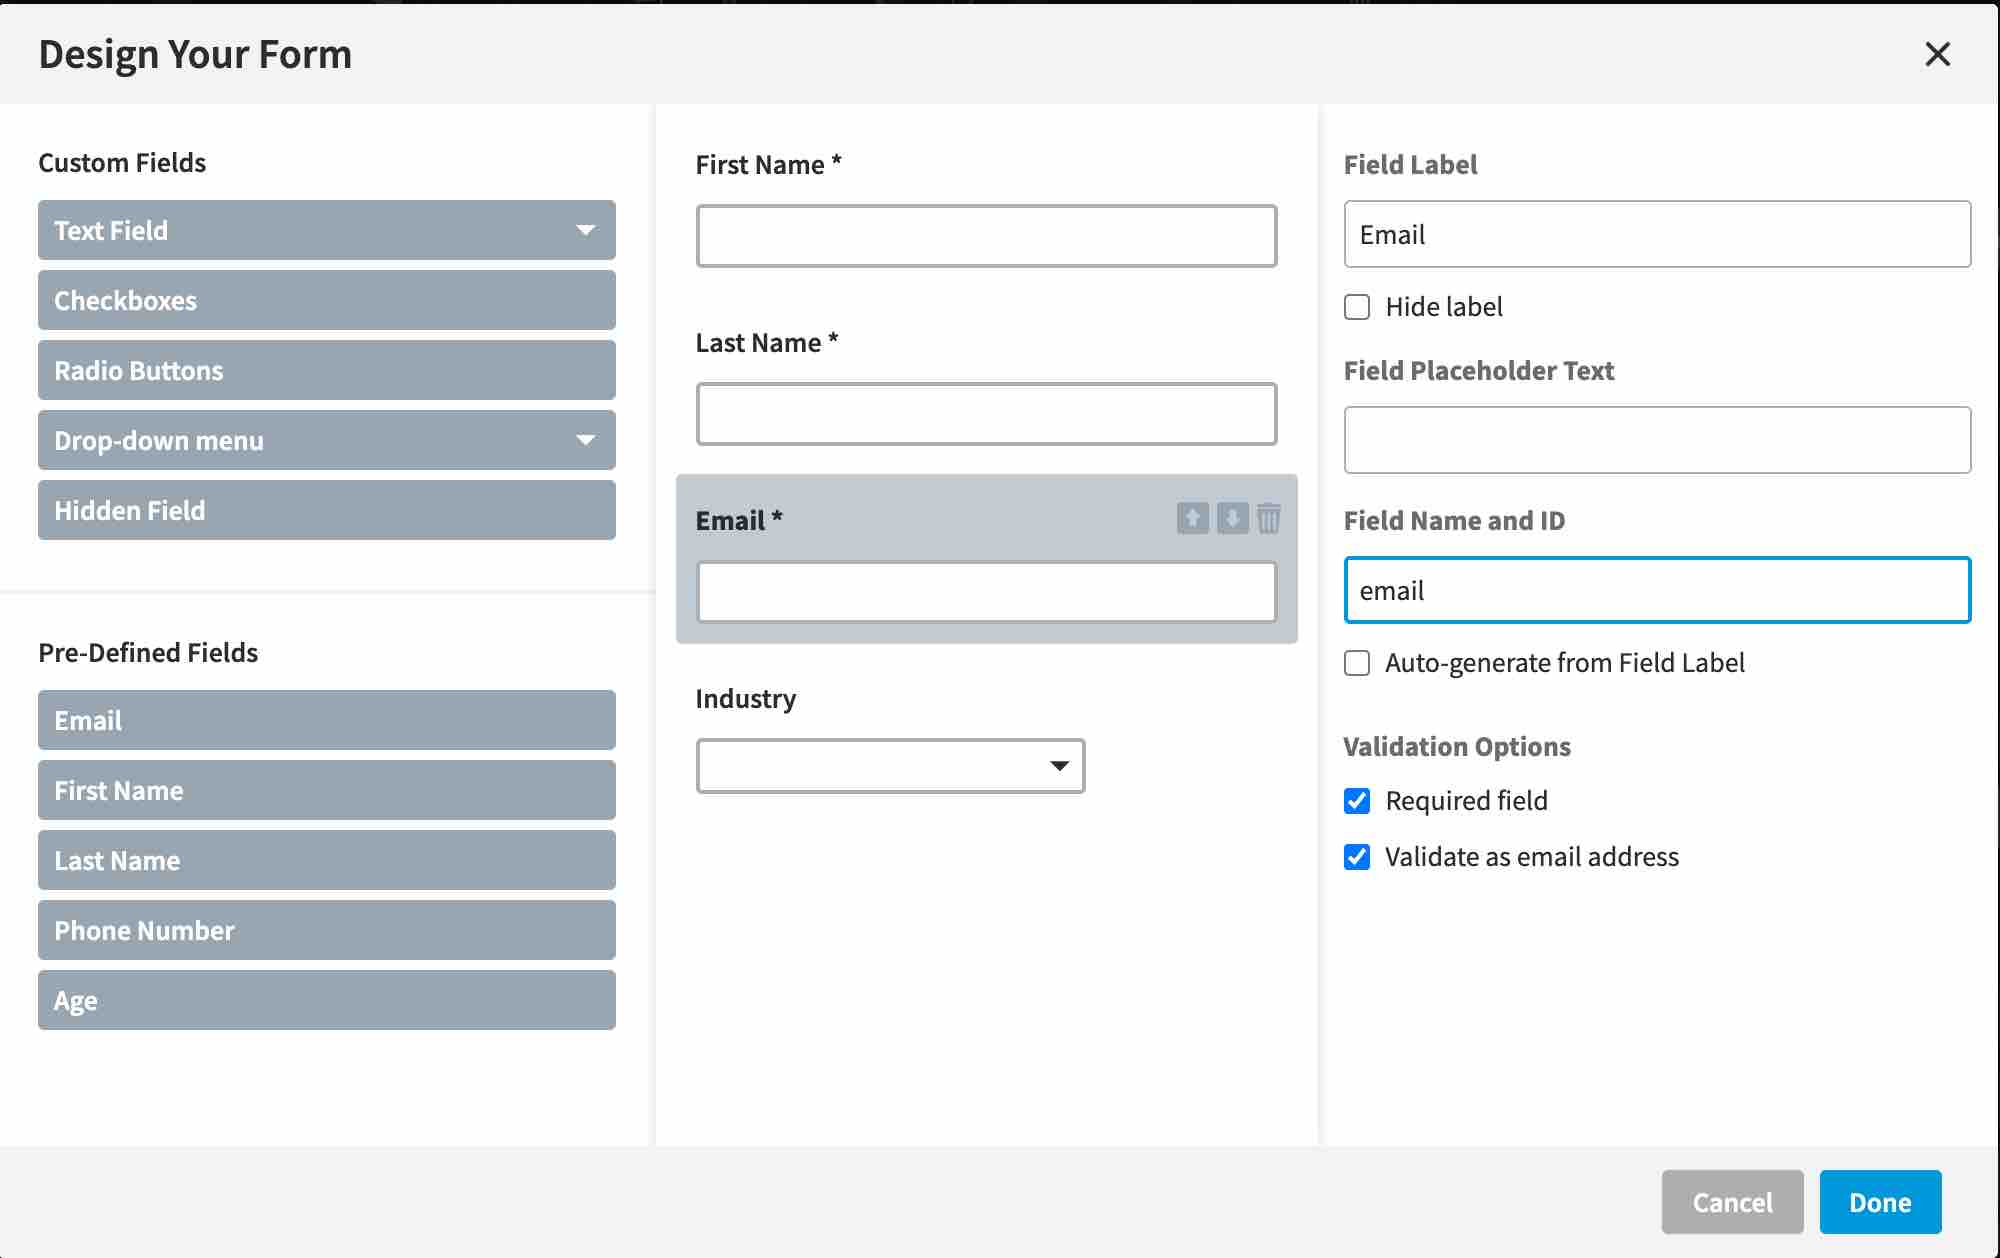 Design your form page in Unbounce with Field Name and ID box set to email